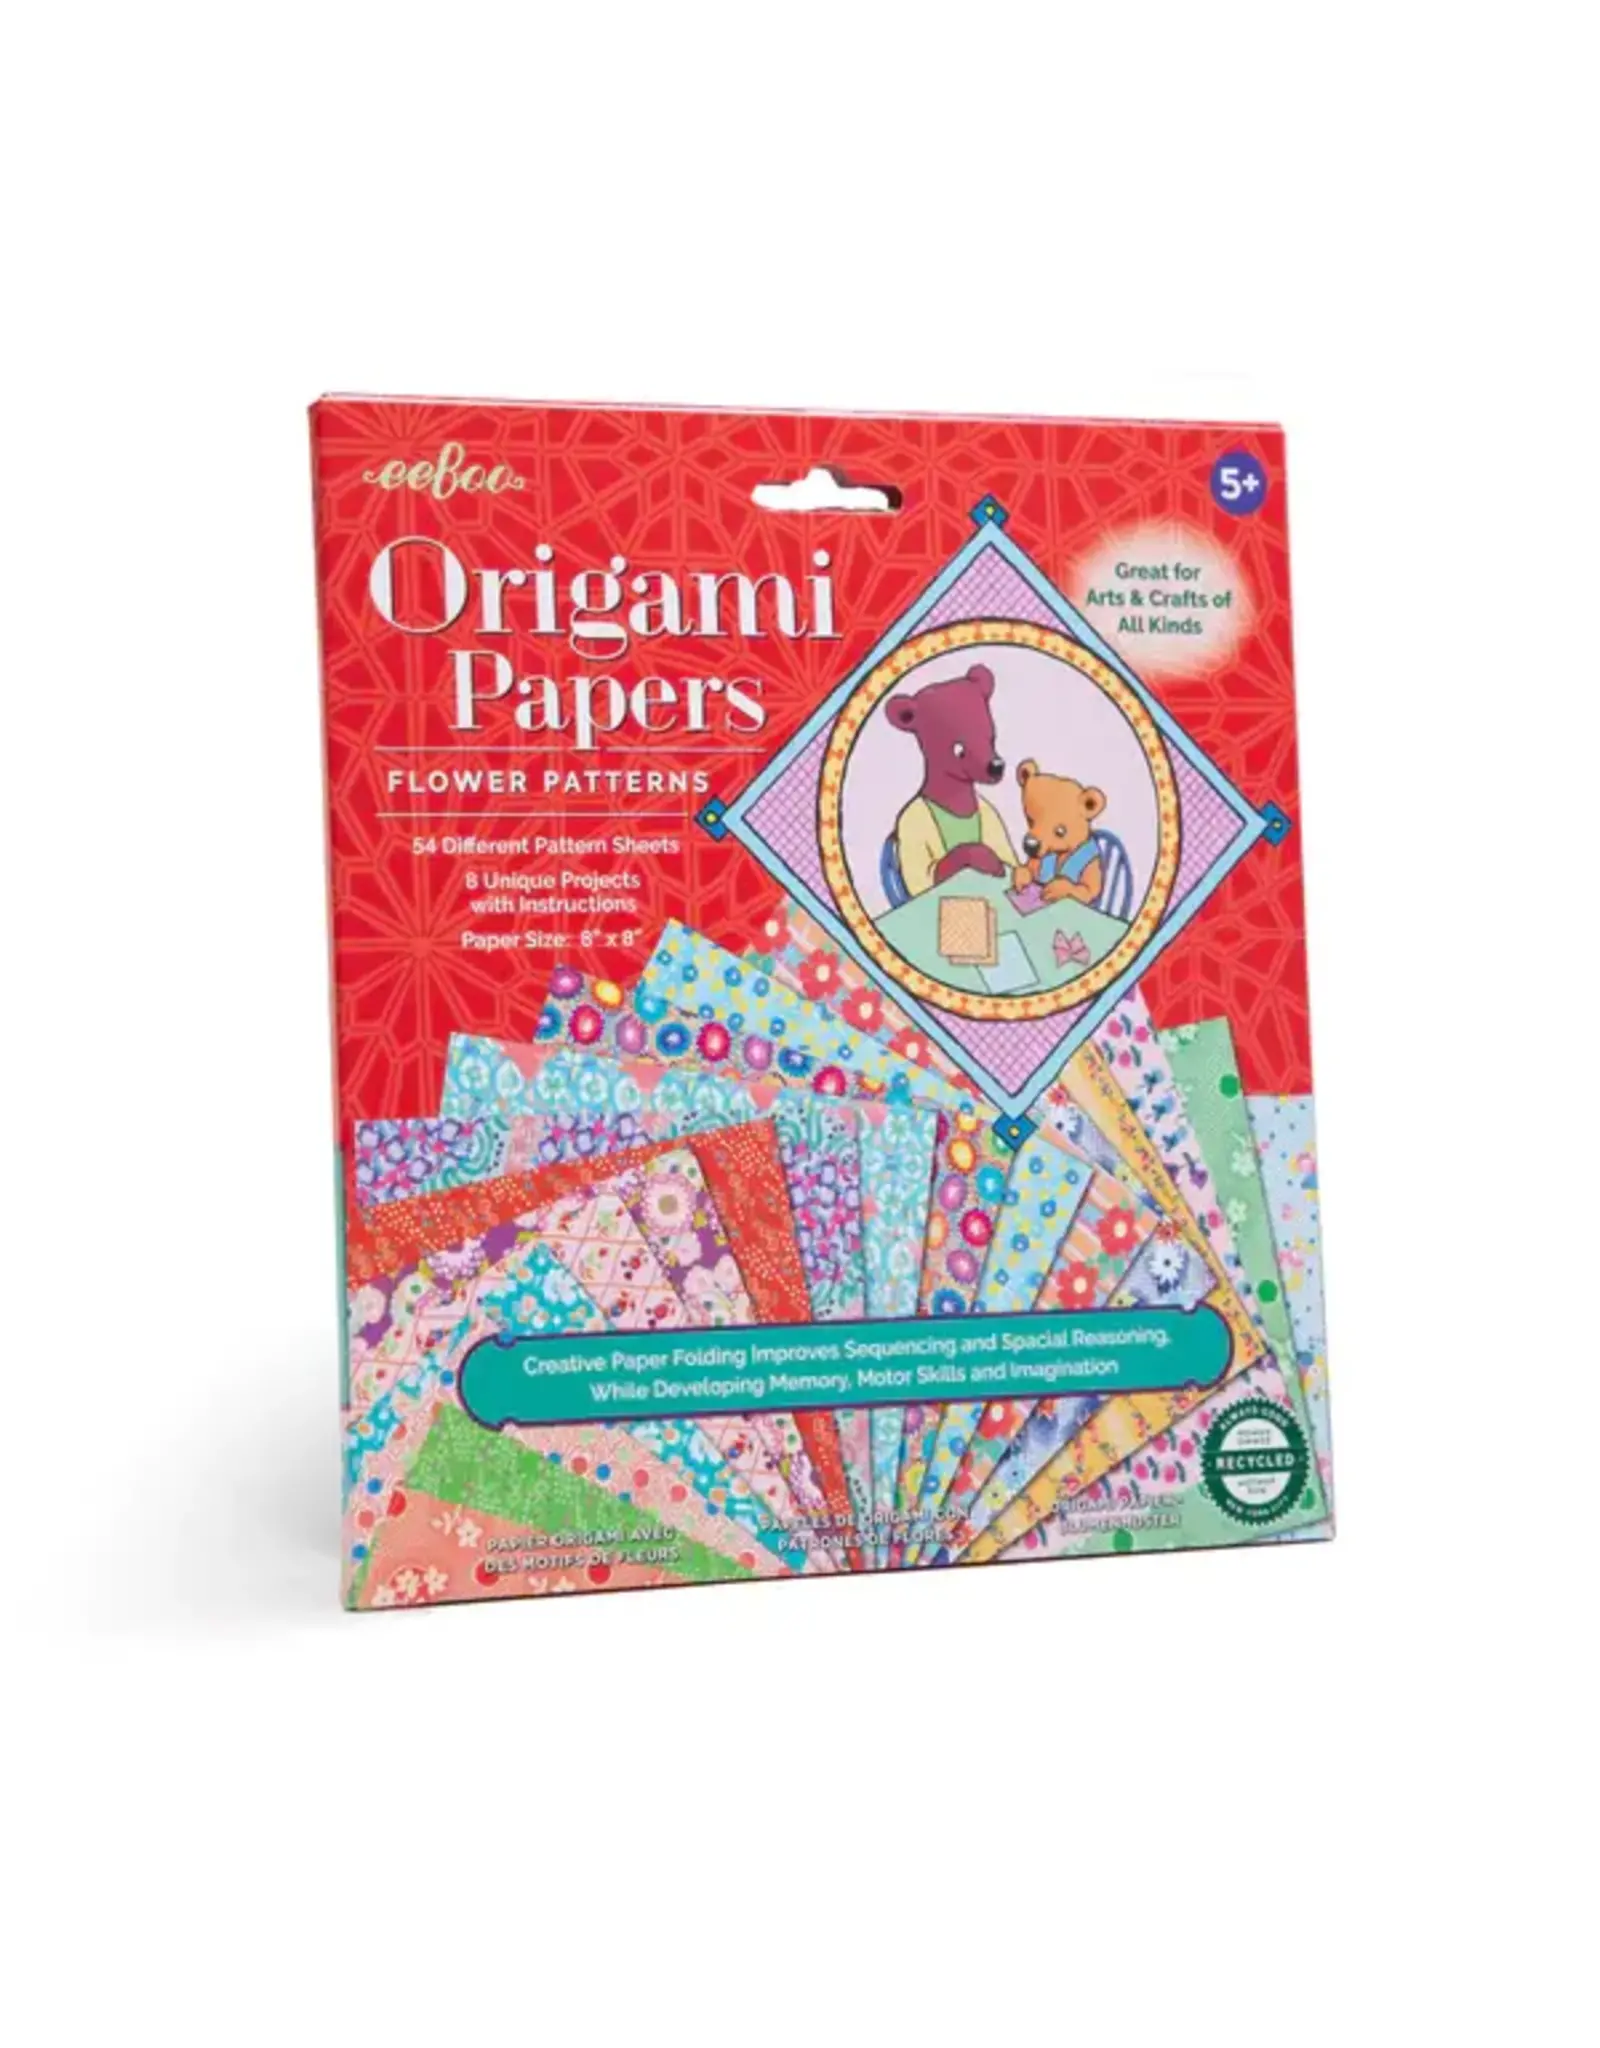 Origami Papers Flower Patterns